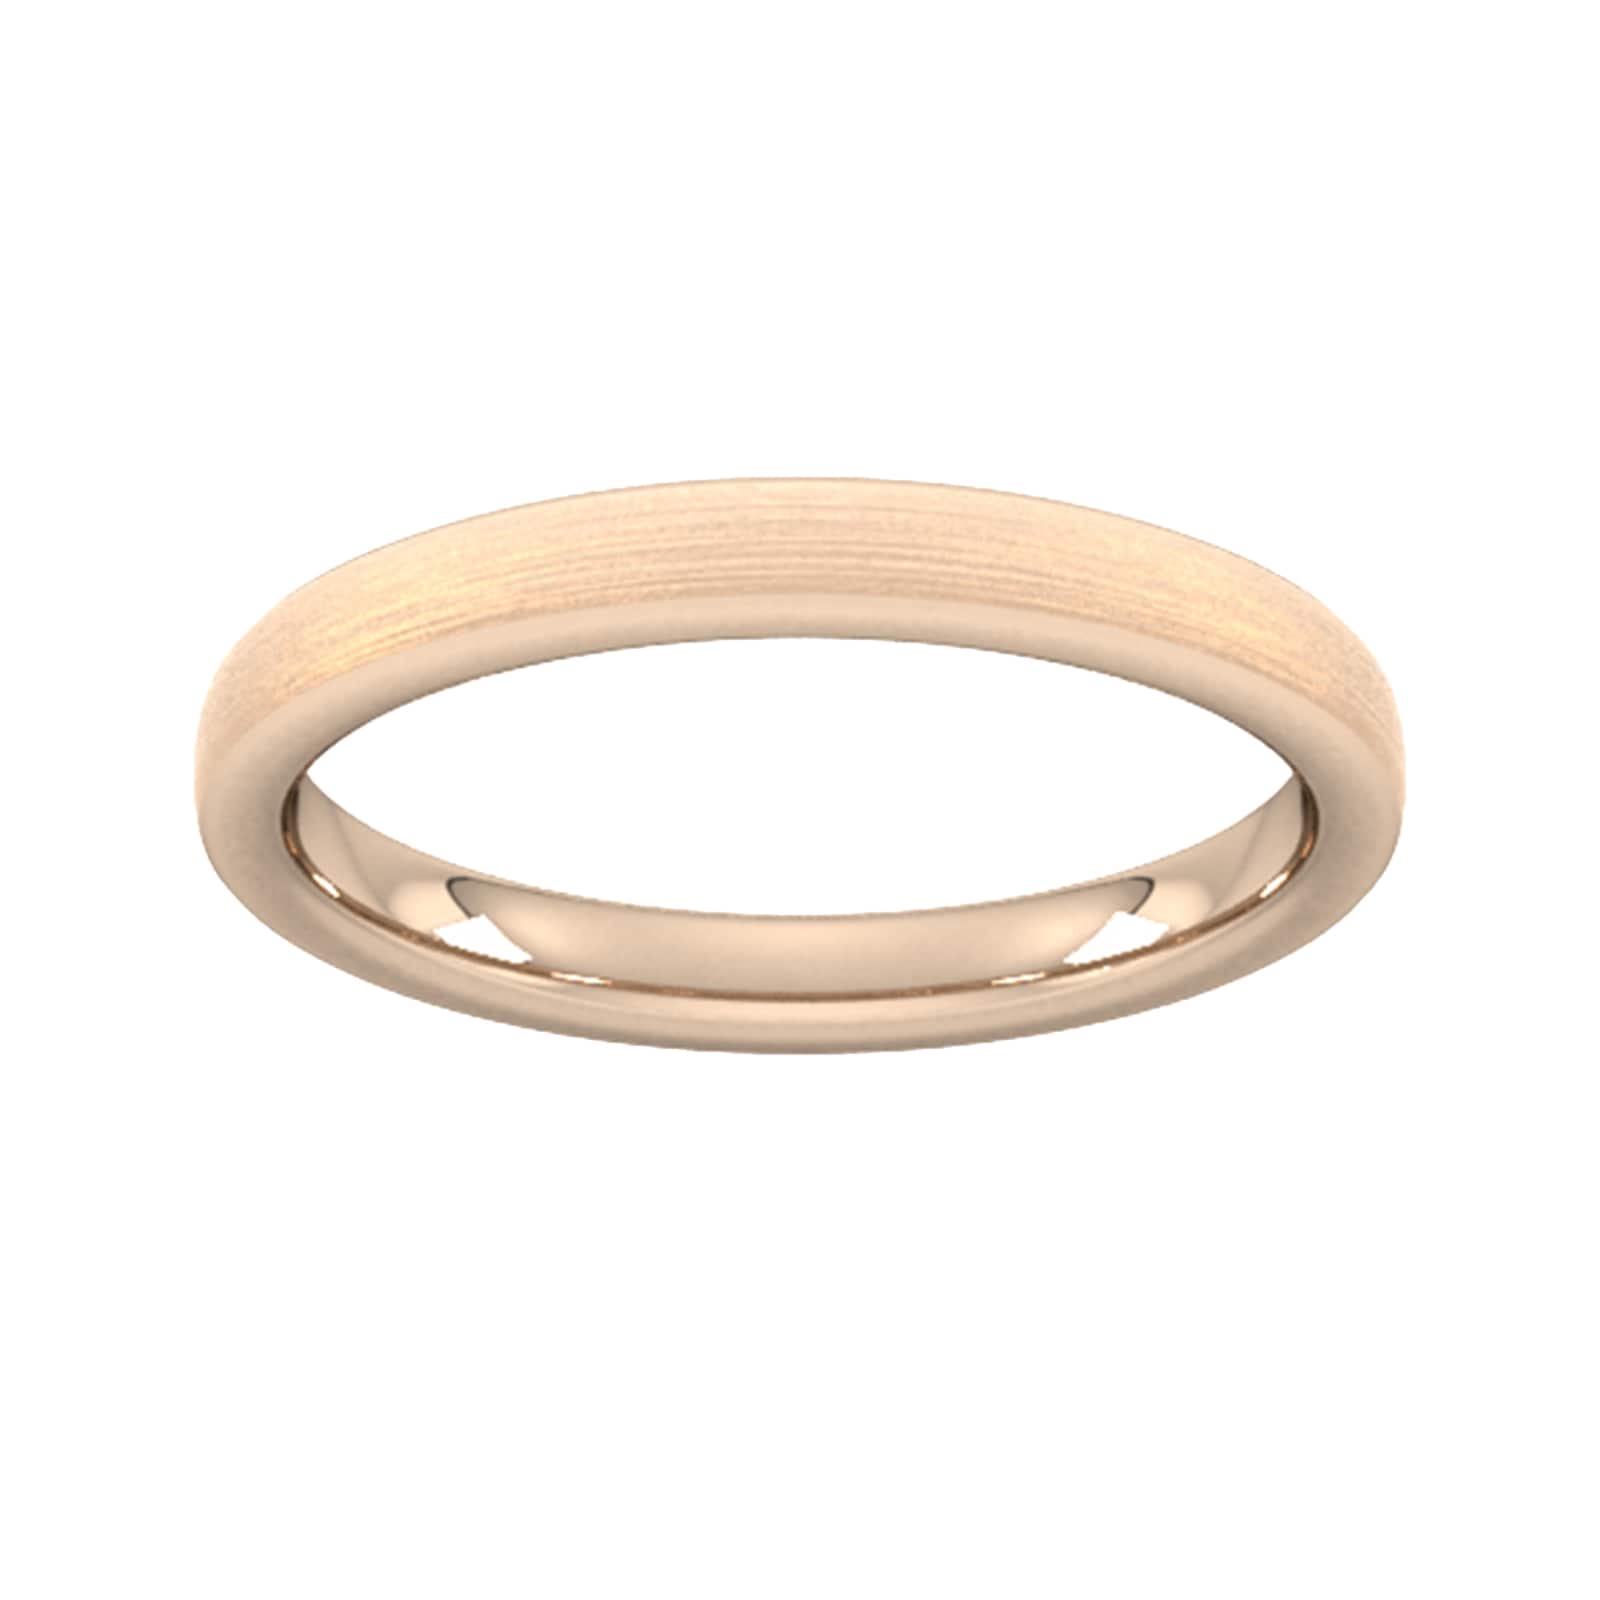 2.5mm D Shape Heavy Polished Chamfered Edges With Matt Centre Wedding Ring In 9 Carat Rose Gold - Ring Size L